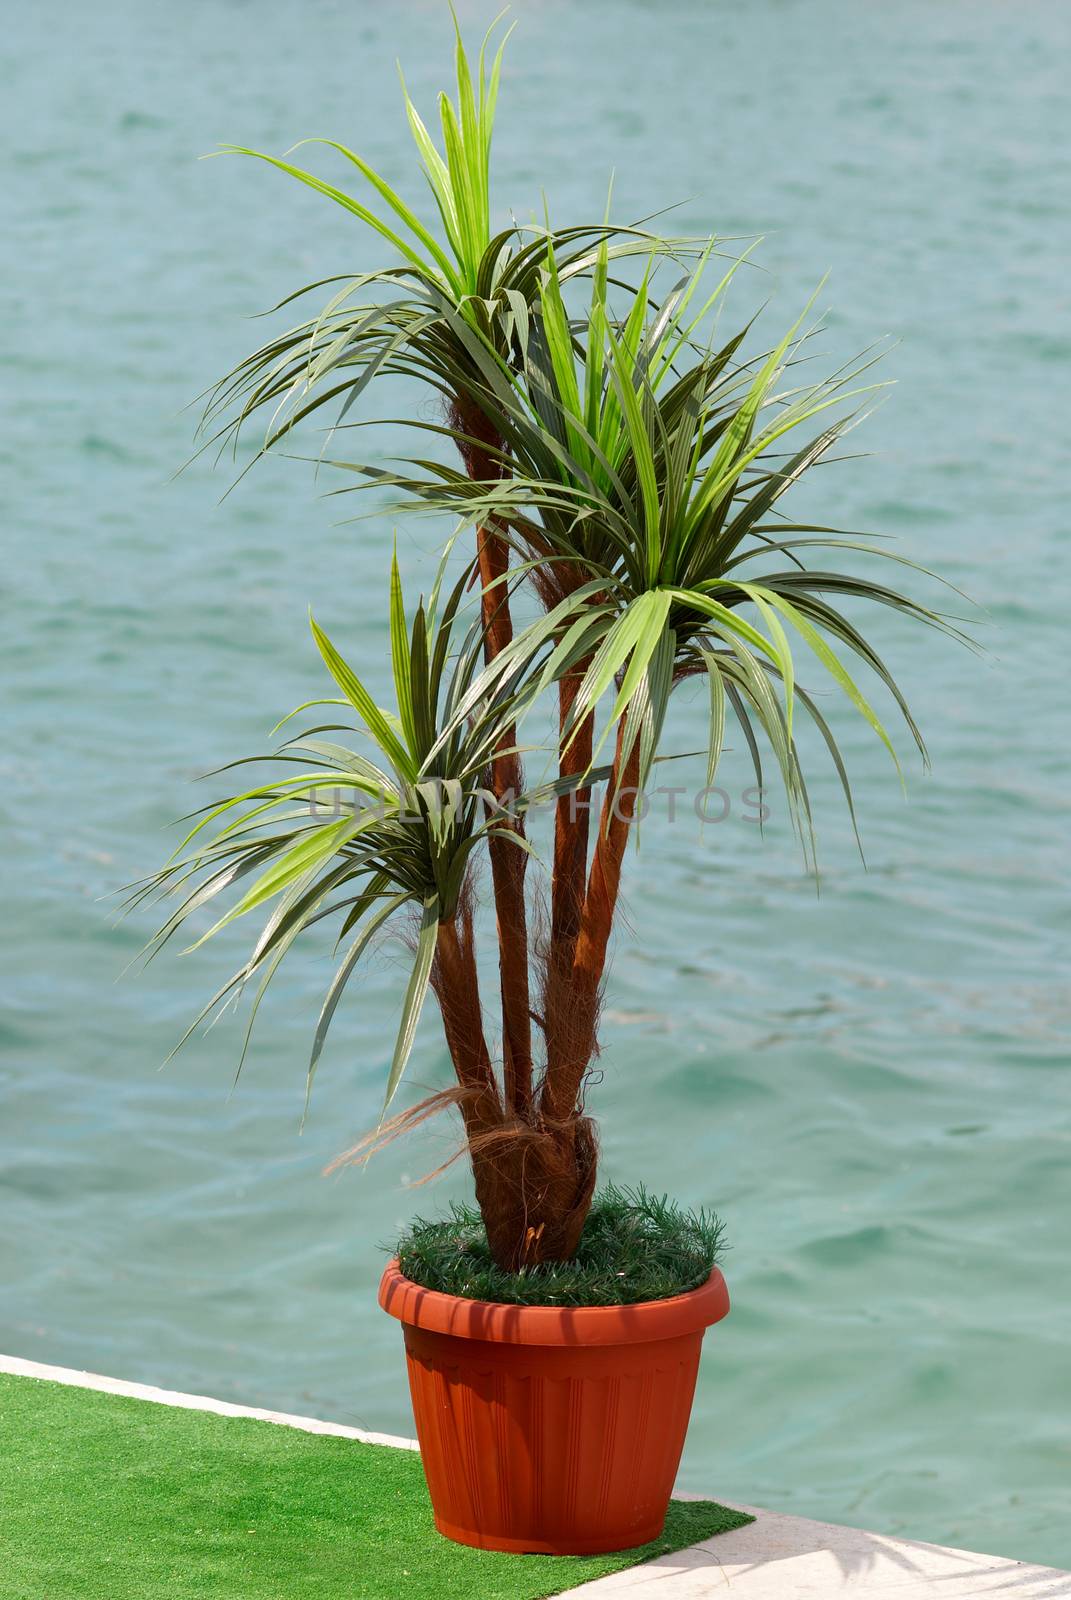 Green palm in the pot. by vapi